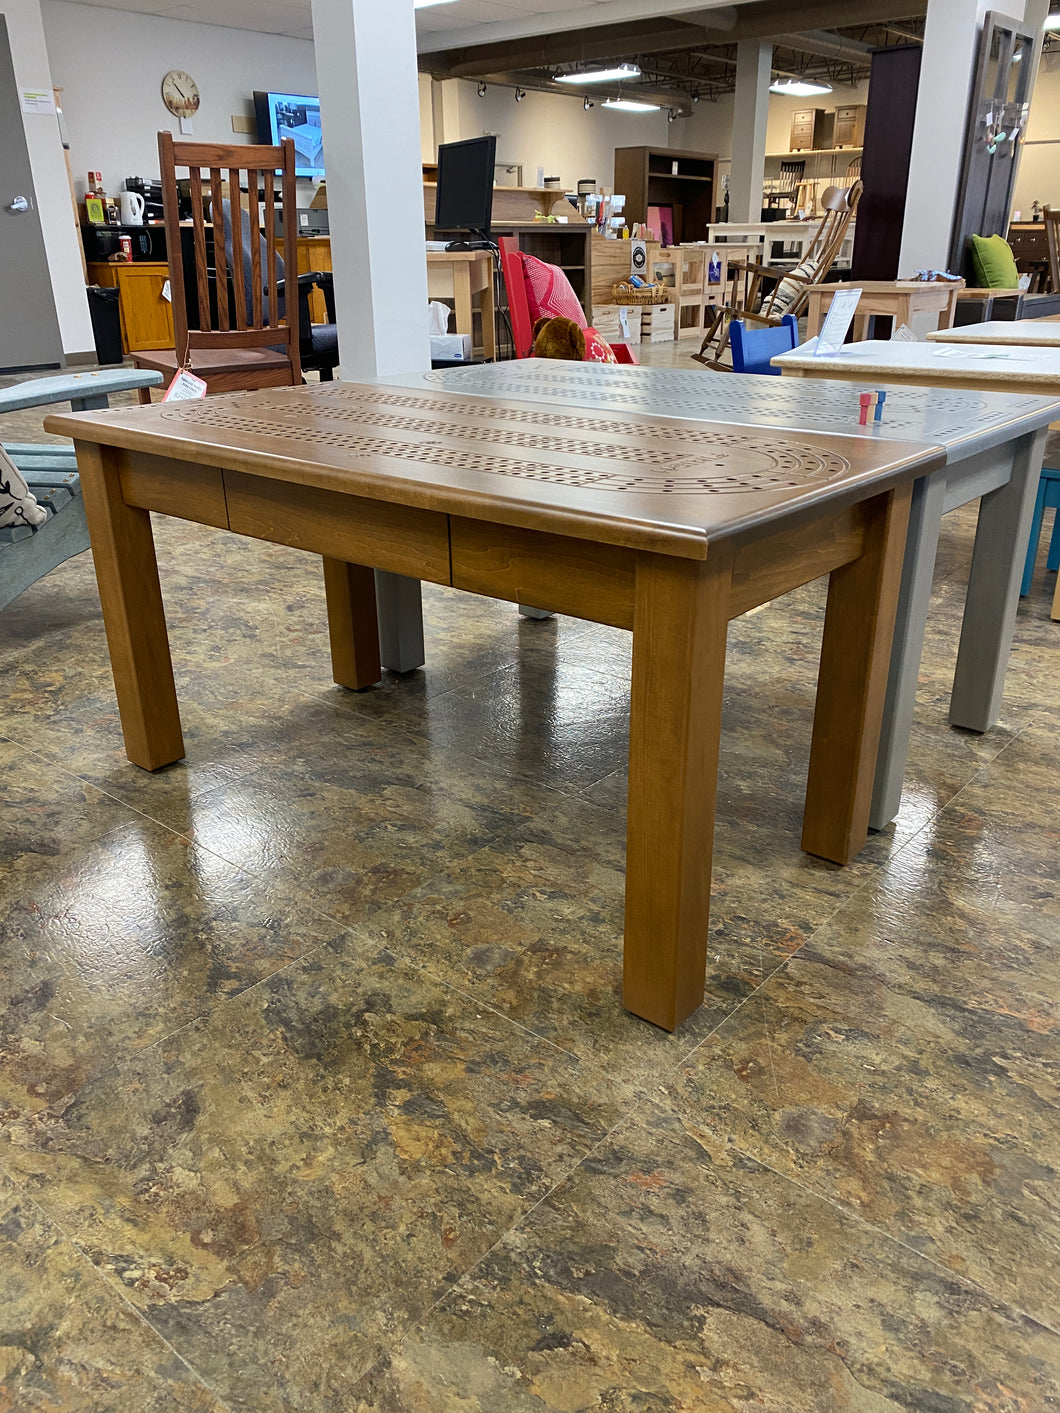 Cribbage table